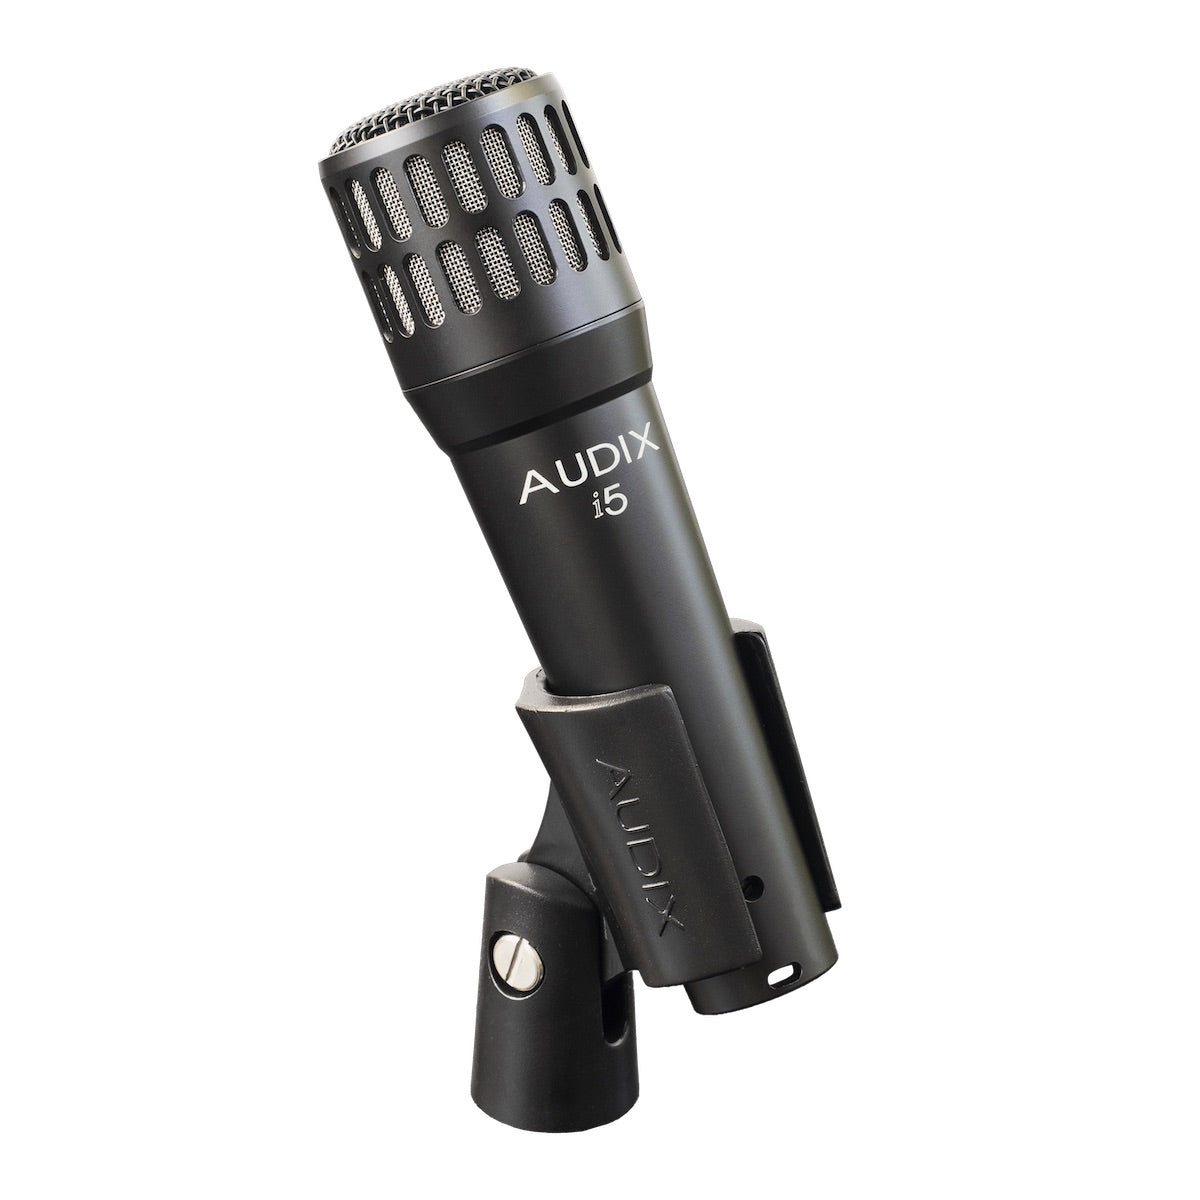 Audix i5 All-Purpose Professional Dynamic Instrument Microphone with clip